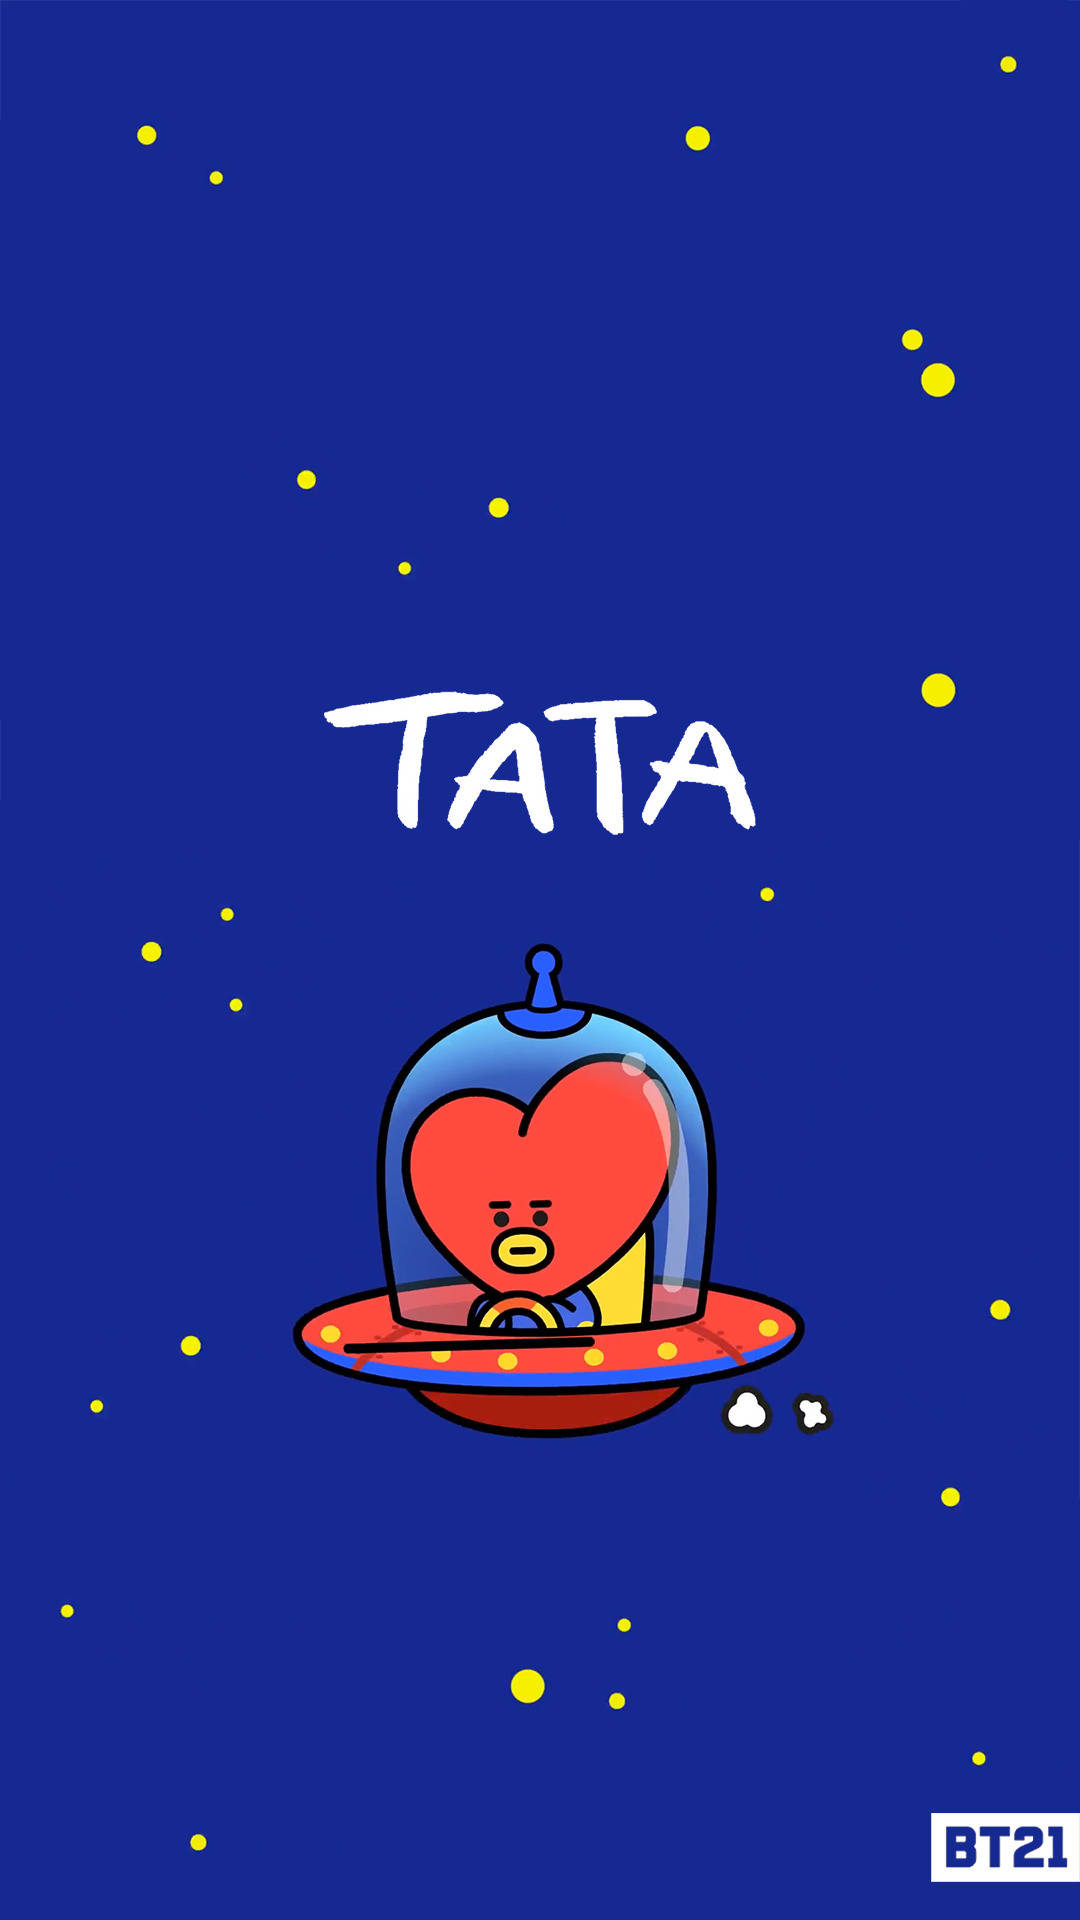 BT21 Tata In Outer Space Wallpaper